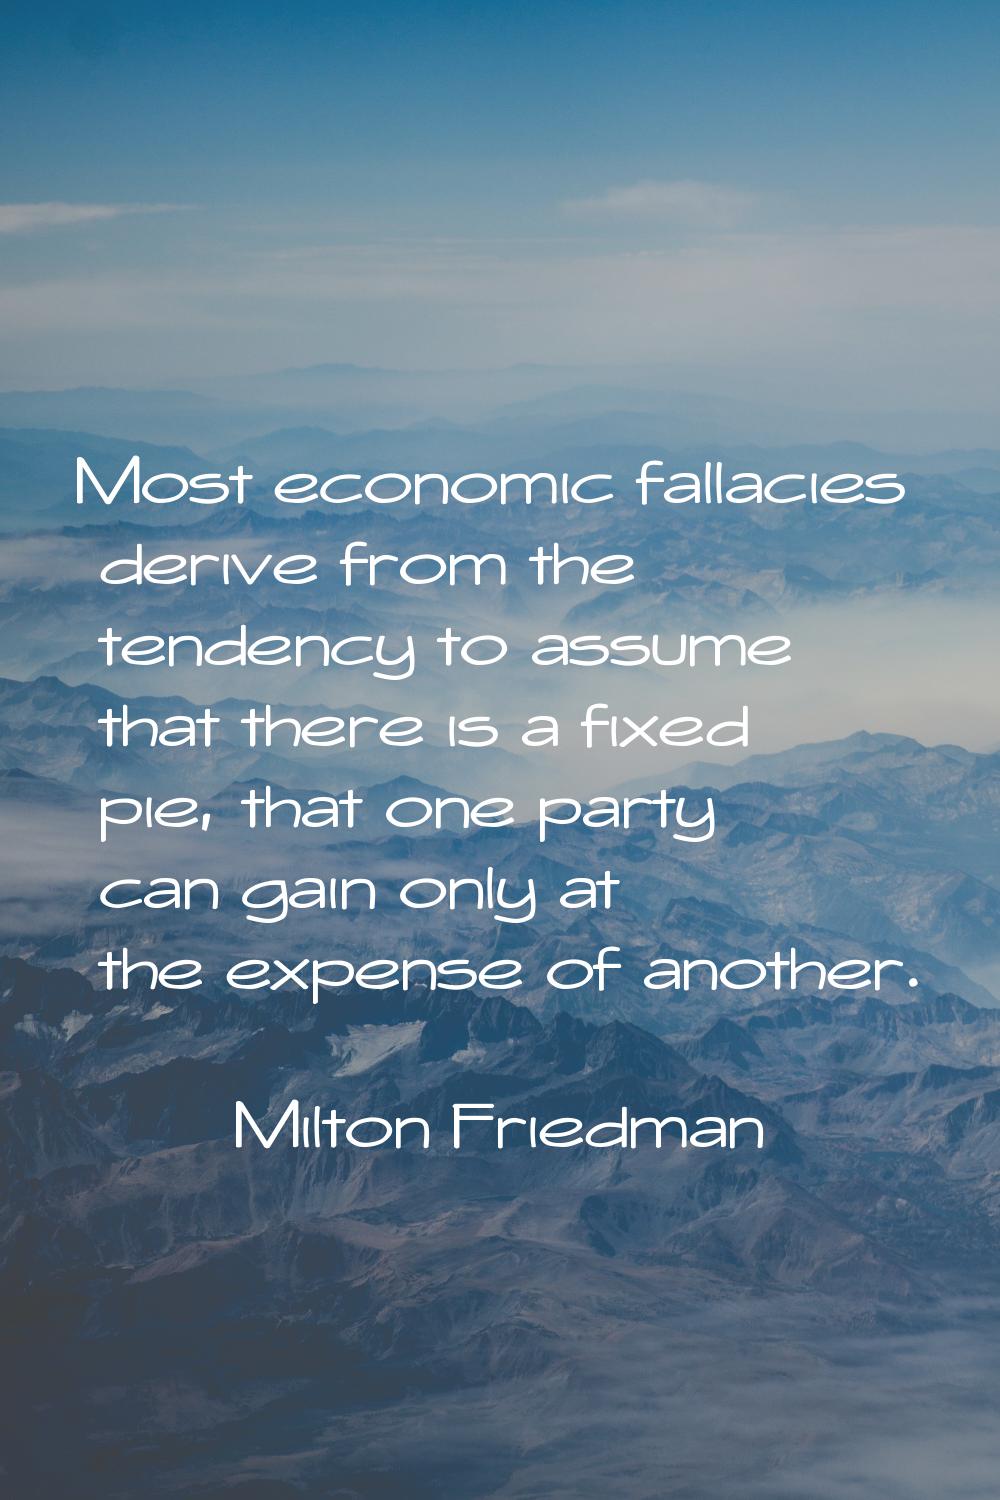 Most economic fallacies derive from the tendency to assume that there is a fixed pie, that one part